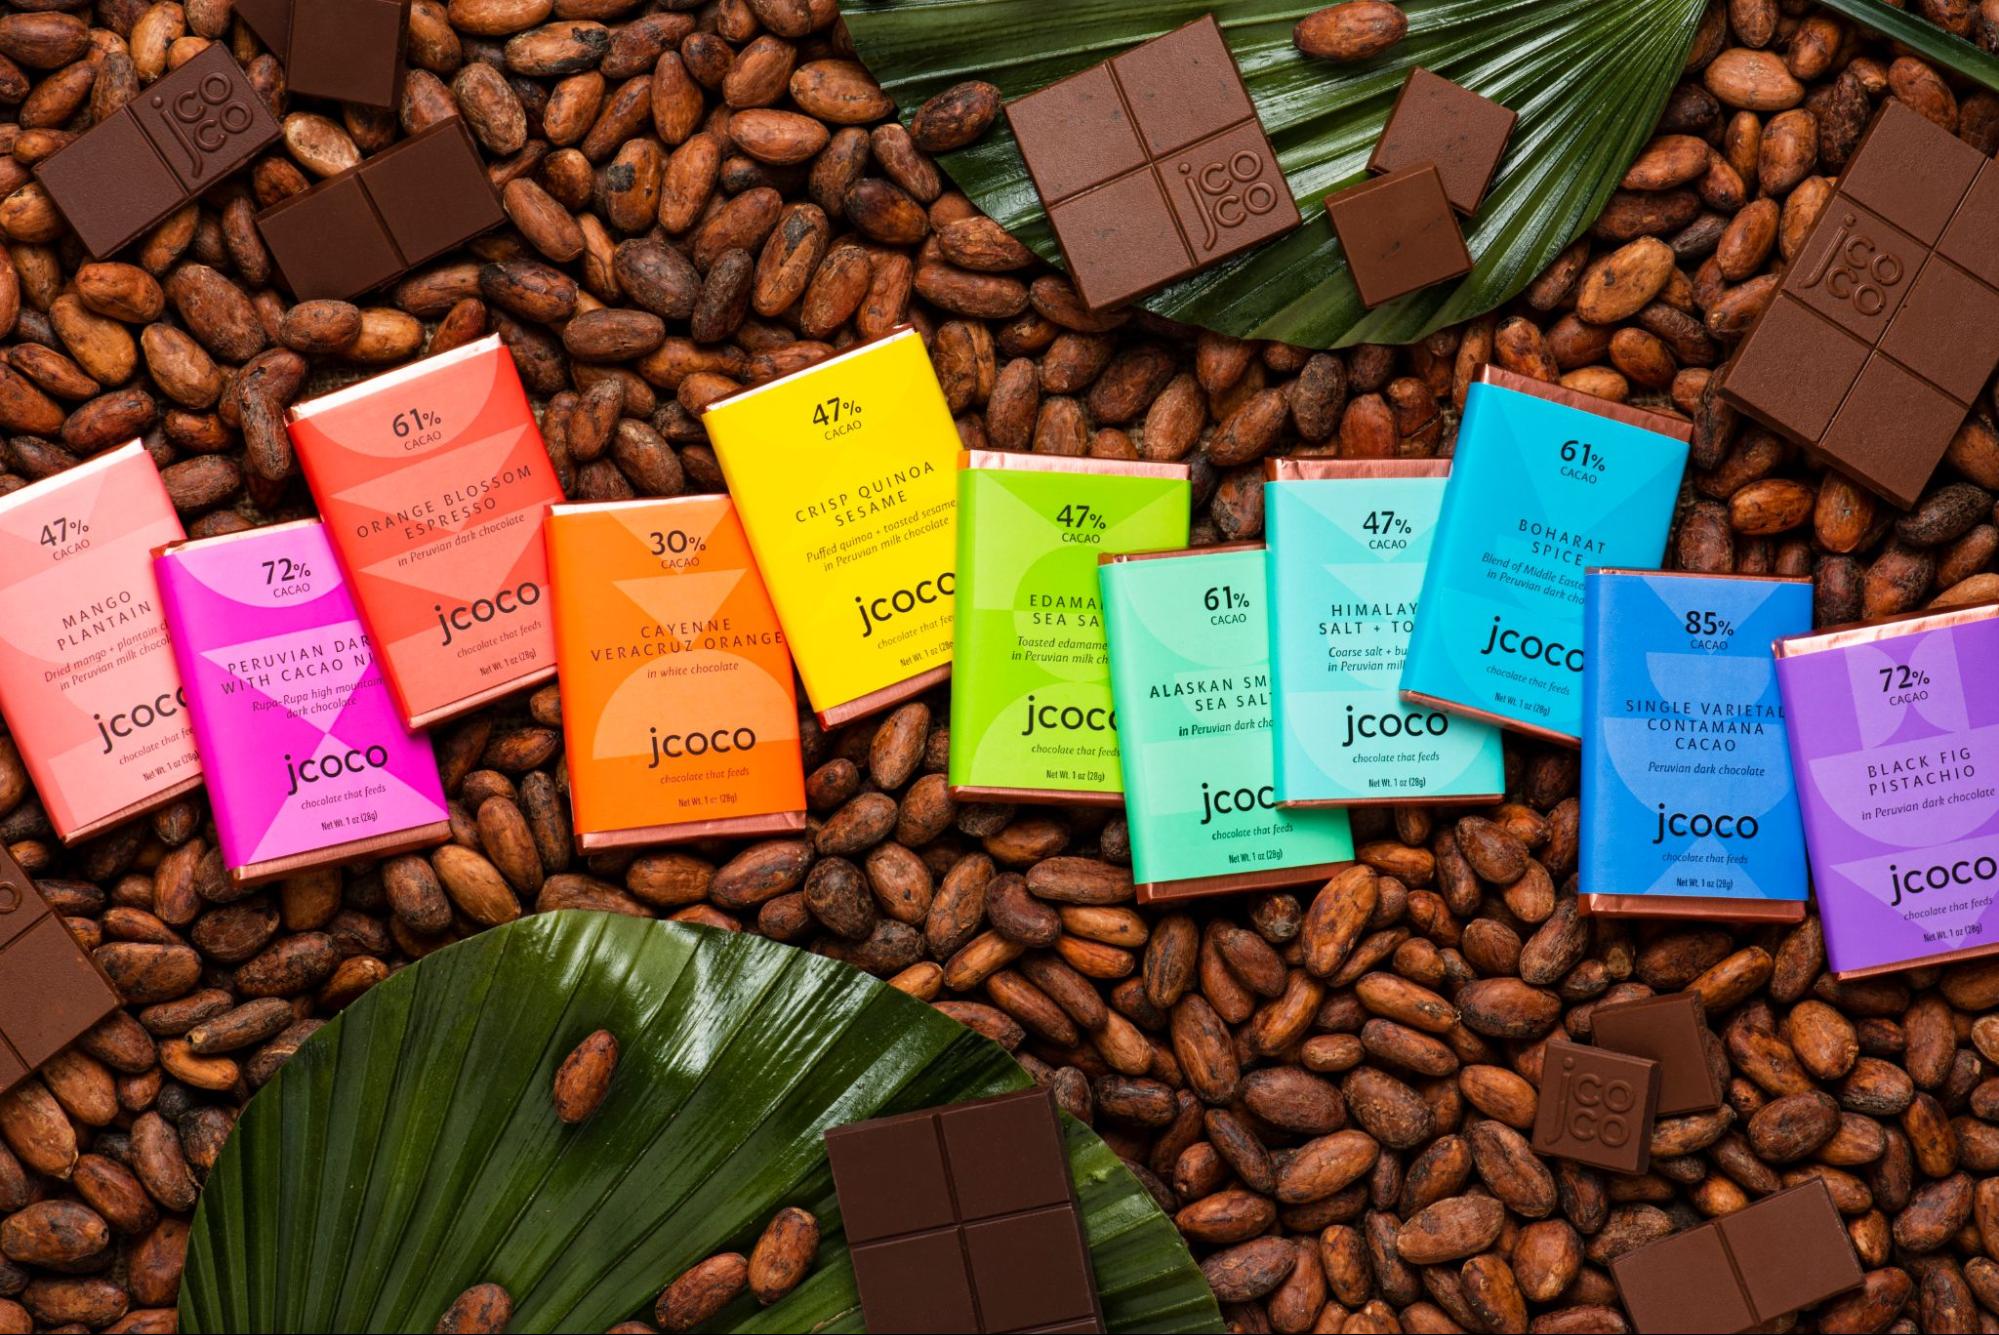 Different flavors of chocolates by the Seattle Chocolate Company